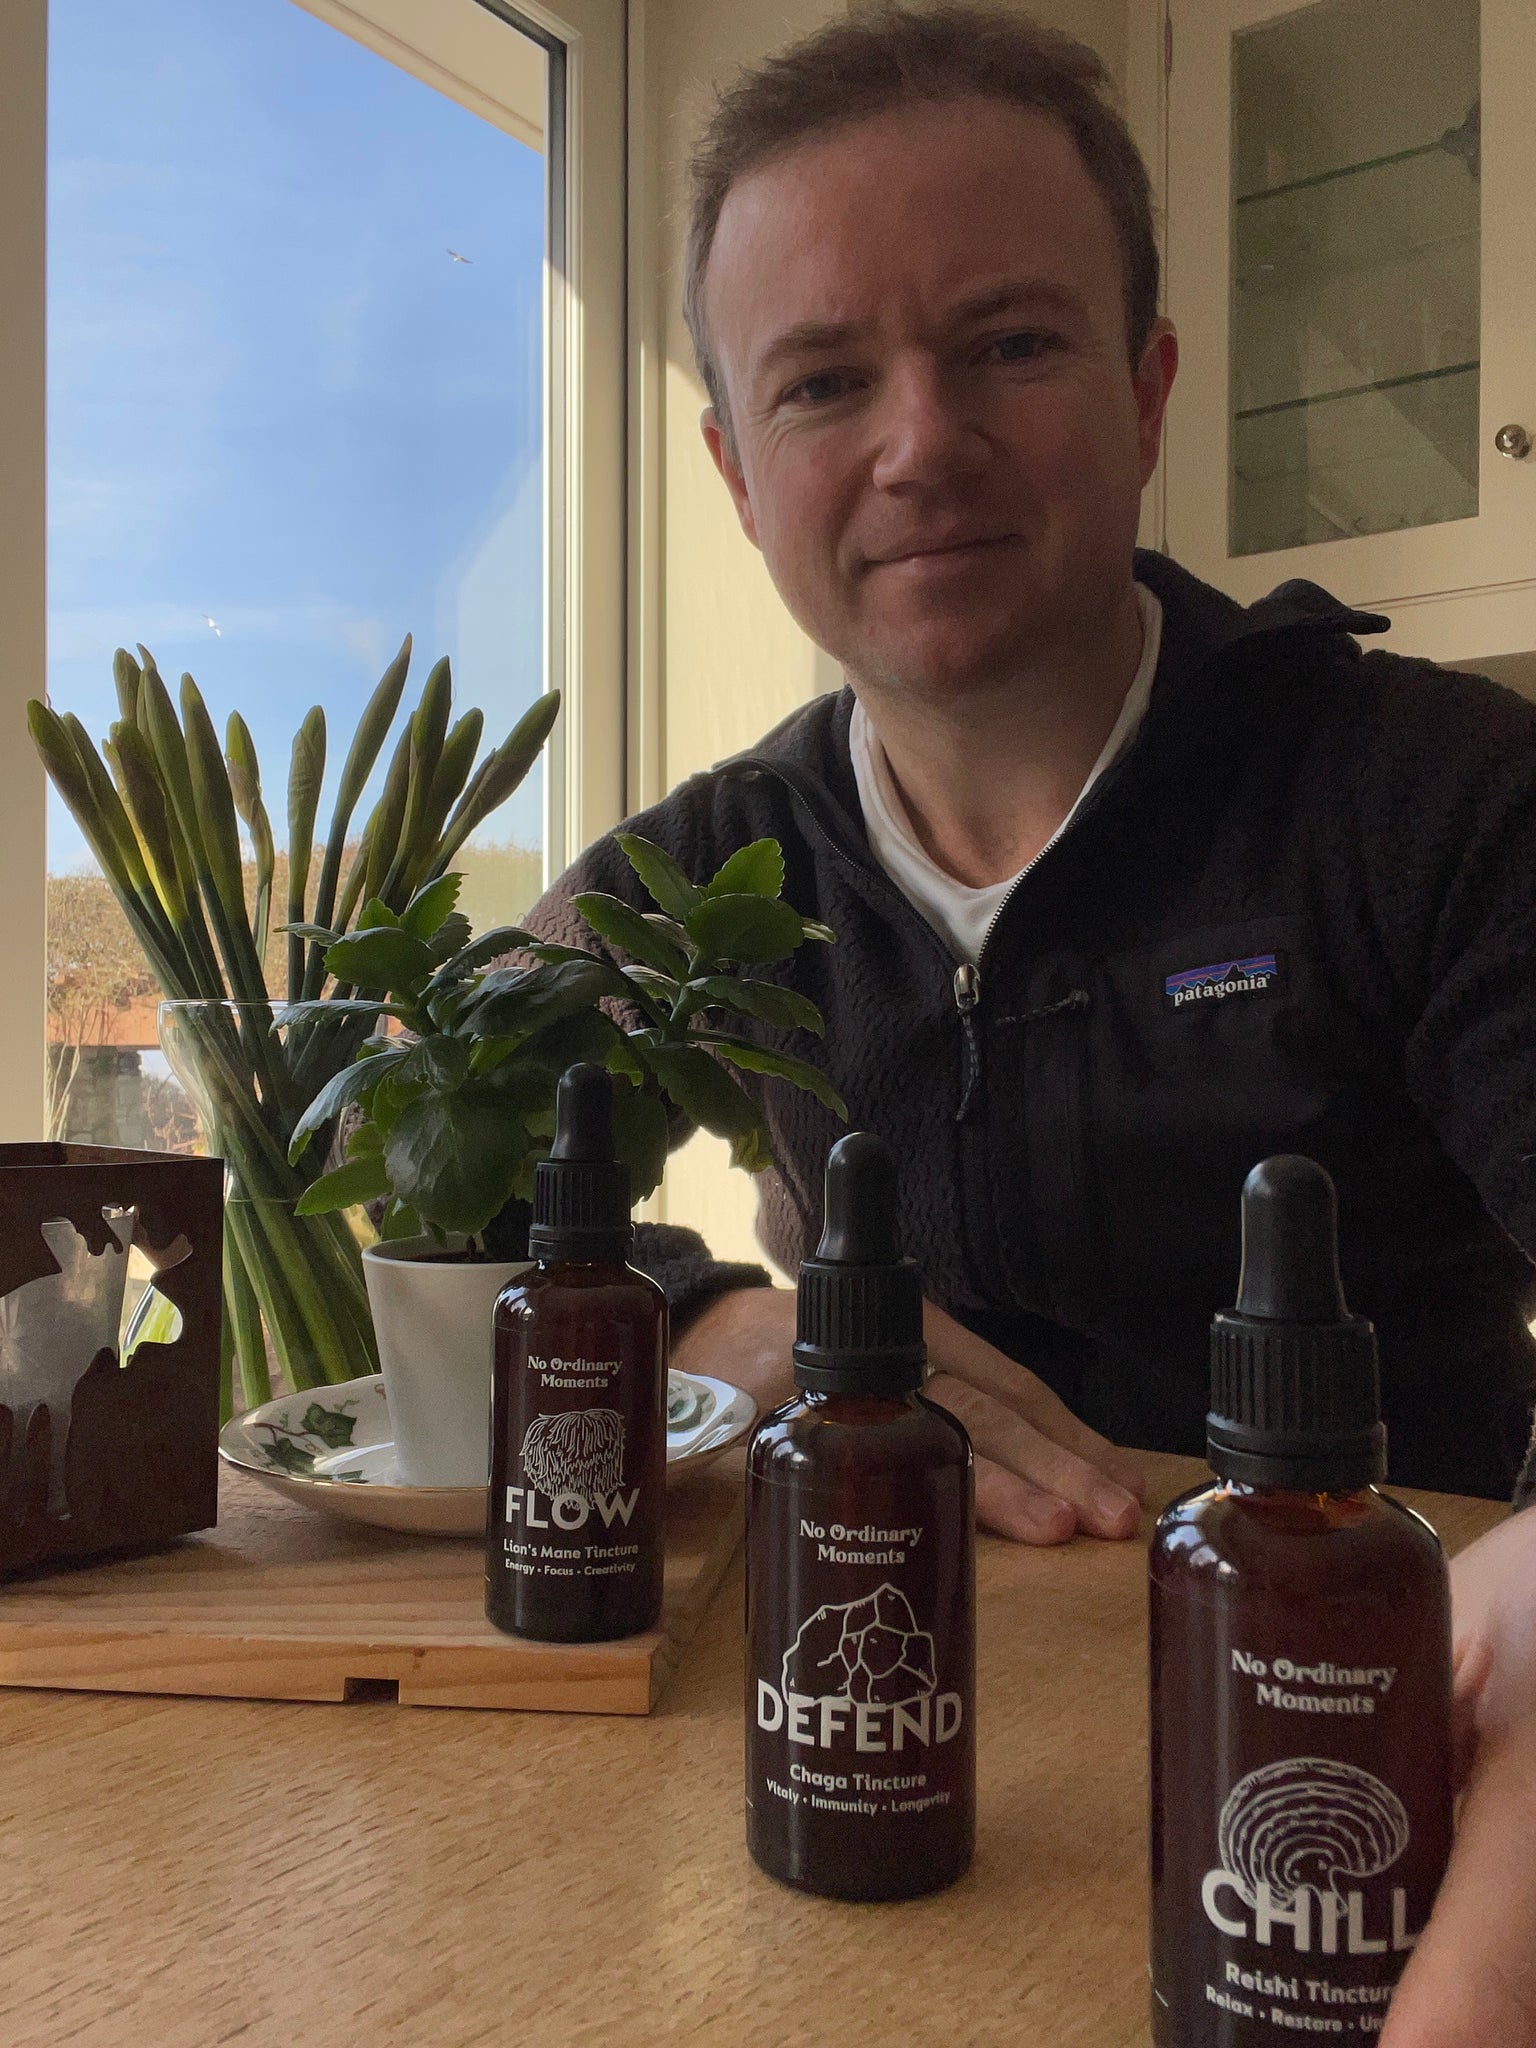 Mushroom Tinctures UK: Which one is best? When to Use and How to Get the Most Out of Your Tincture